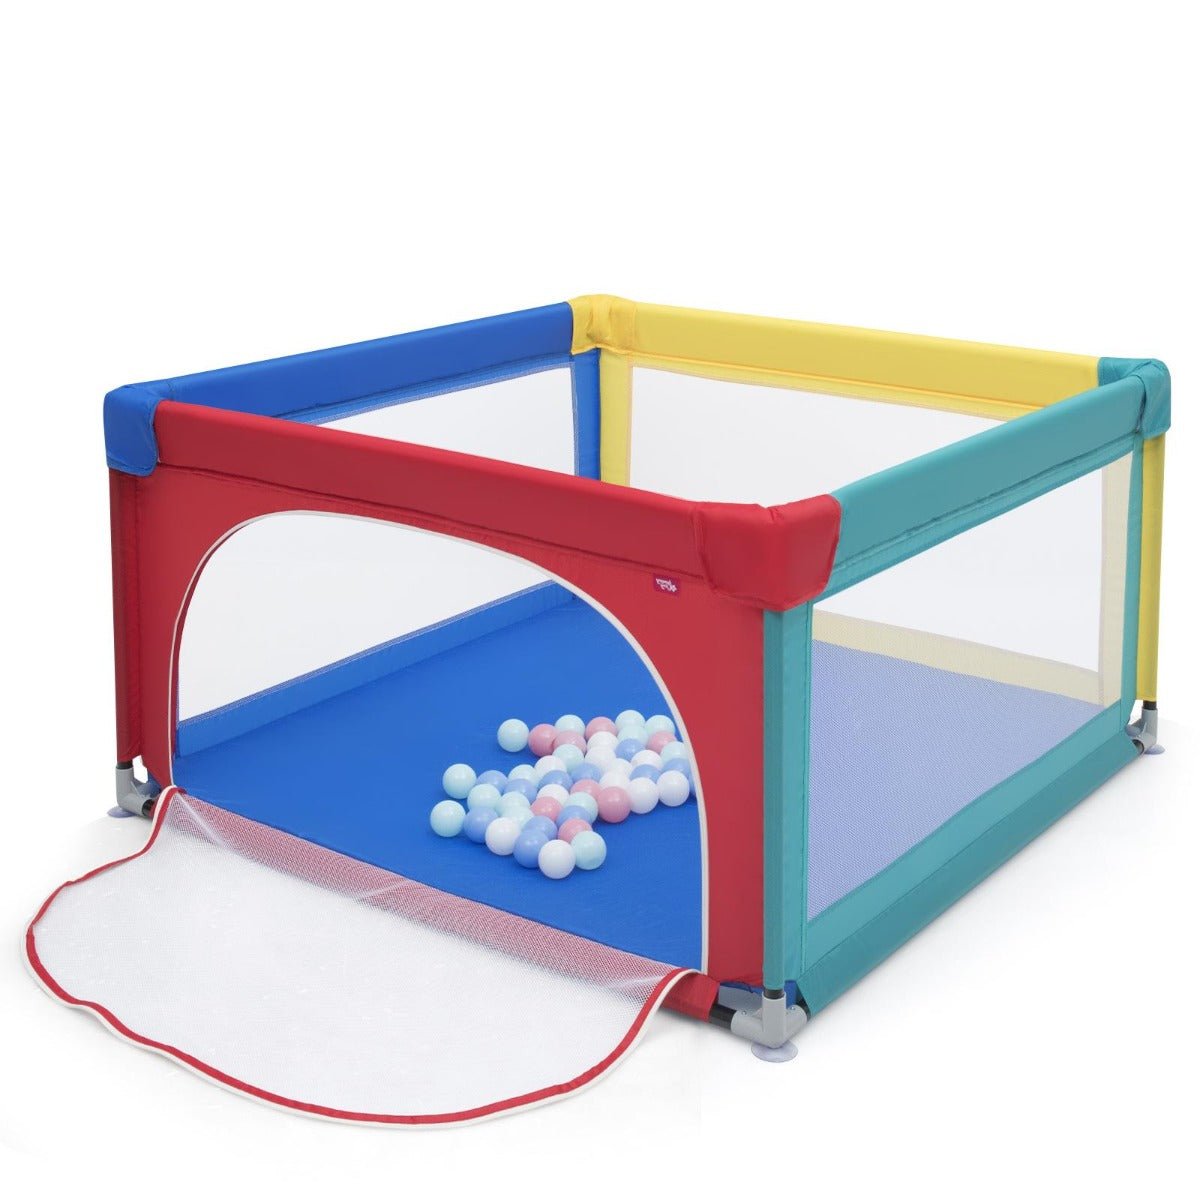 Multicolour Playpen for Babies and Toddlers with Safety Activity Fence and 50 Ocean Balls